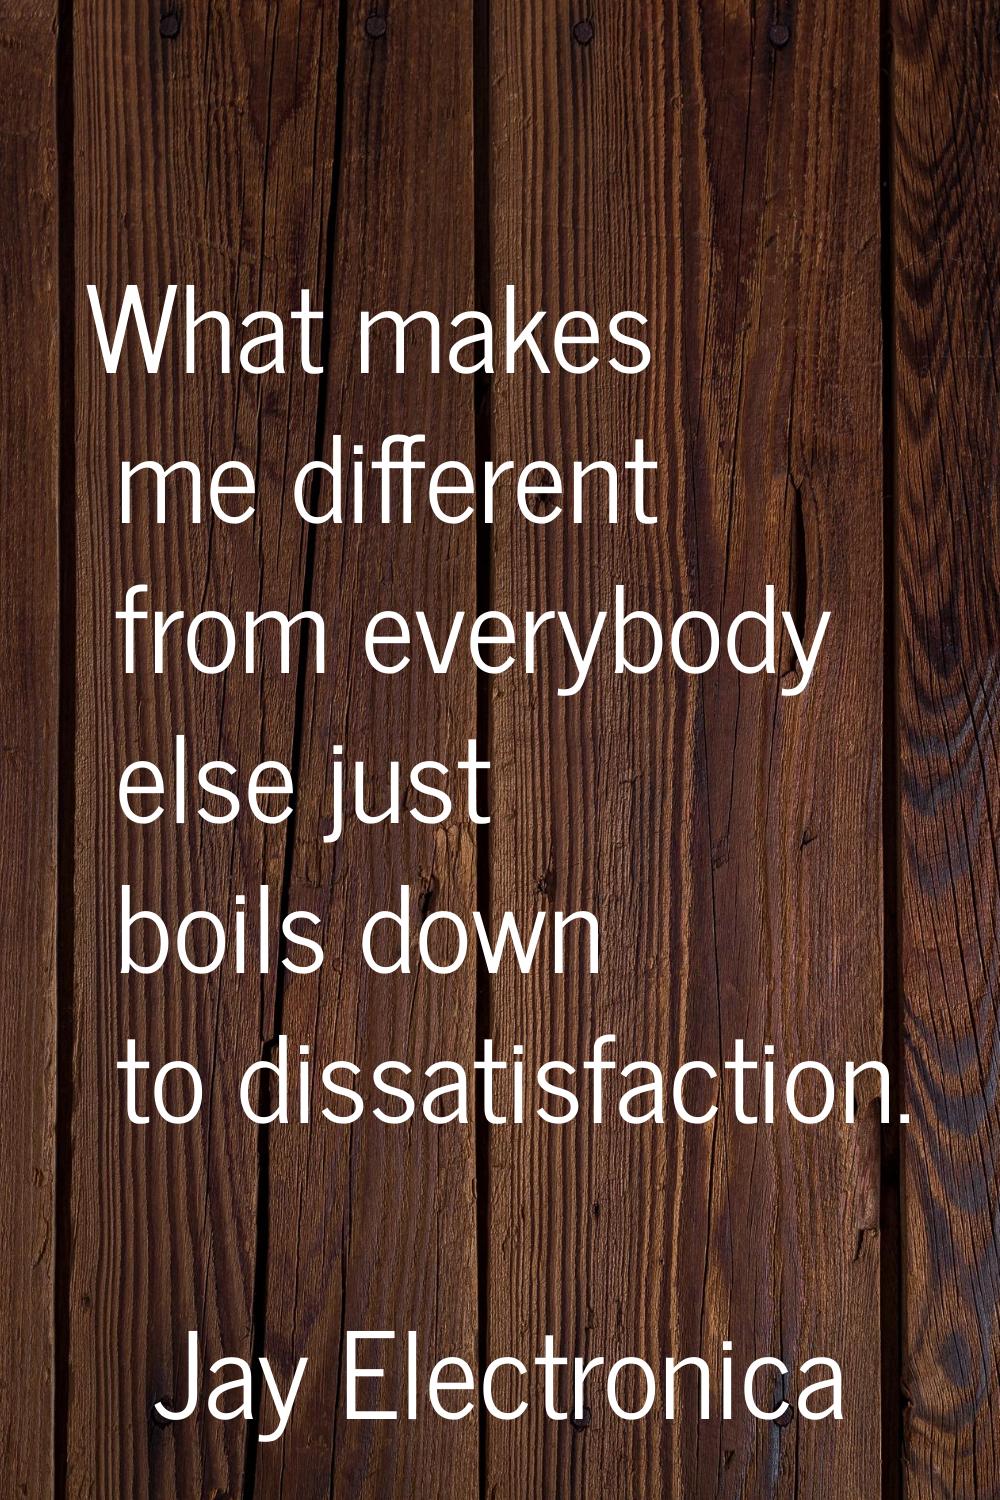 What makes me different from everybody else just boils down to dissatisfaction.